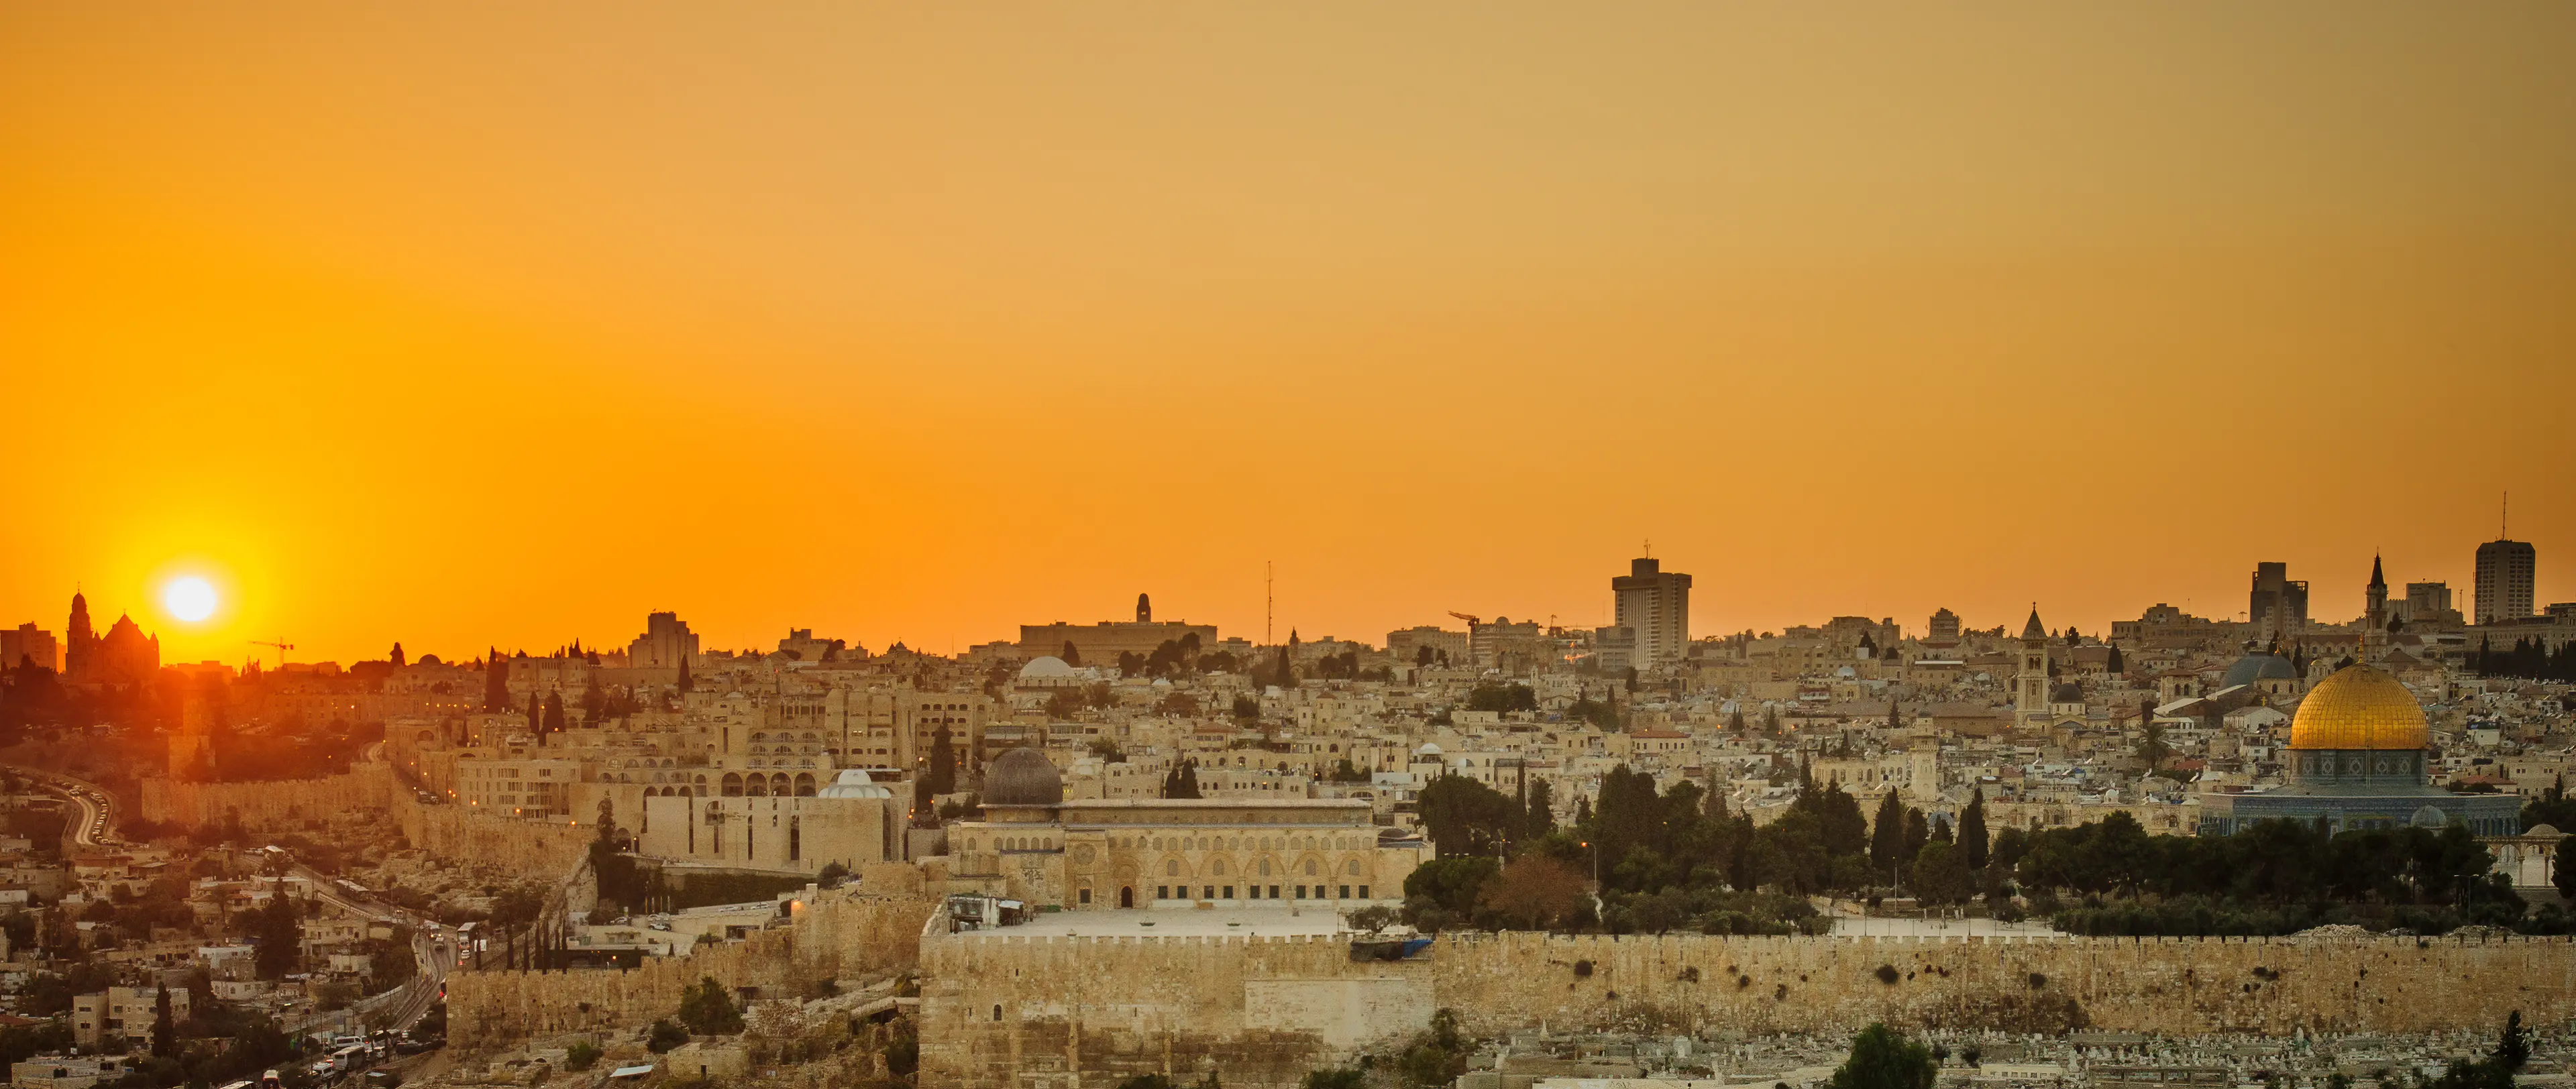 Explore Jerusalem, Israel in One-Day Travel Itinerary